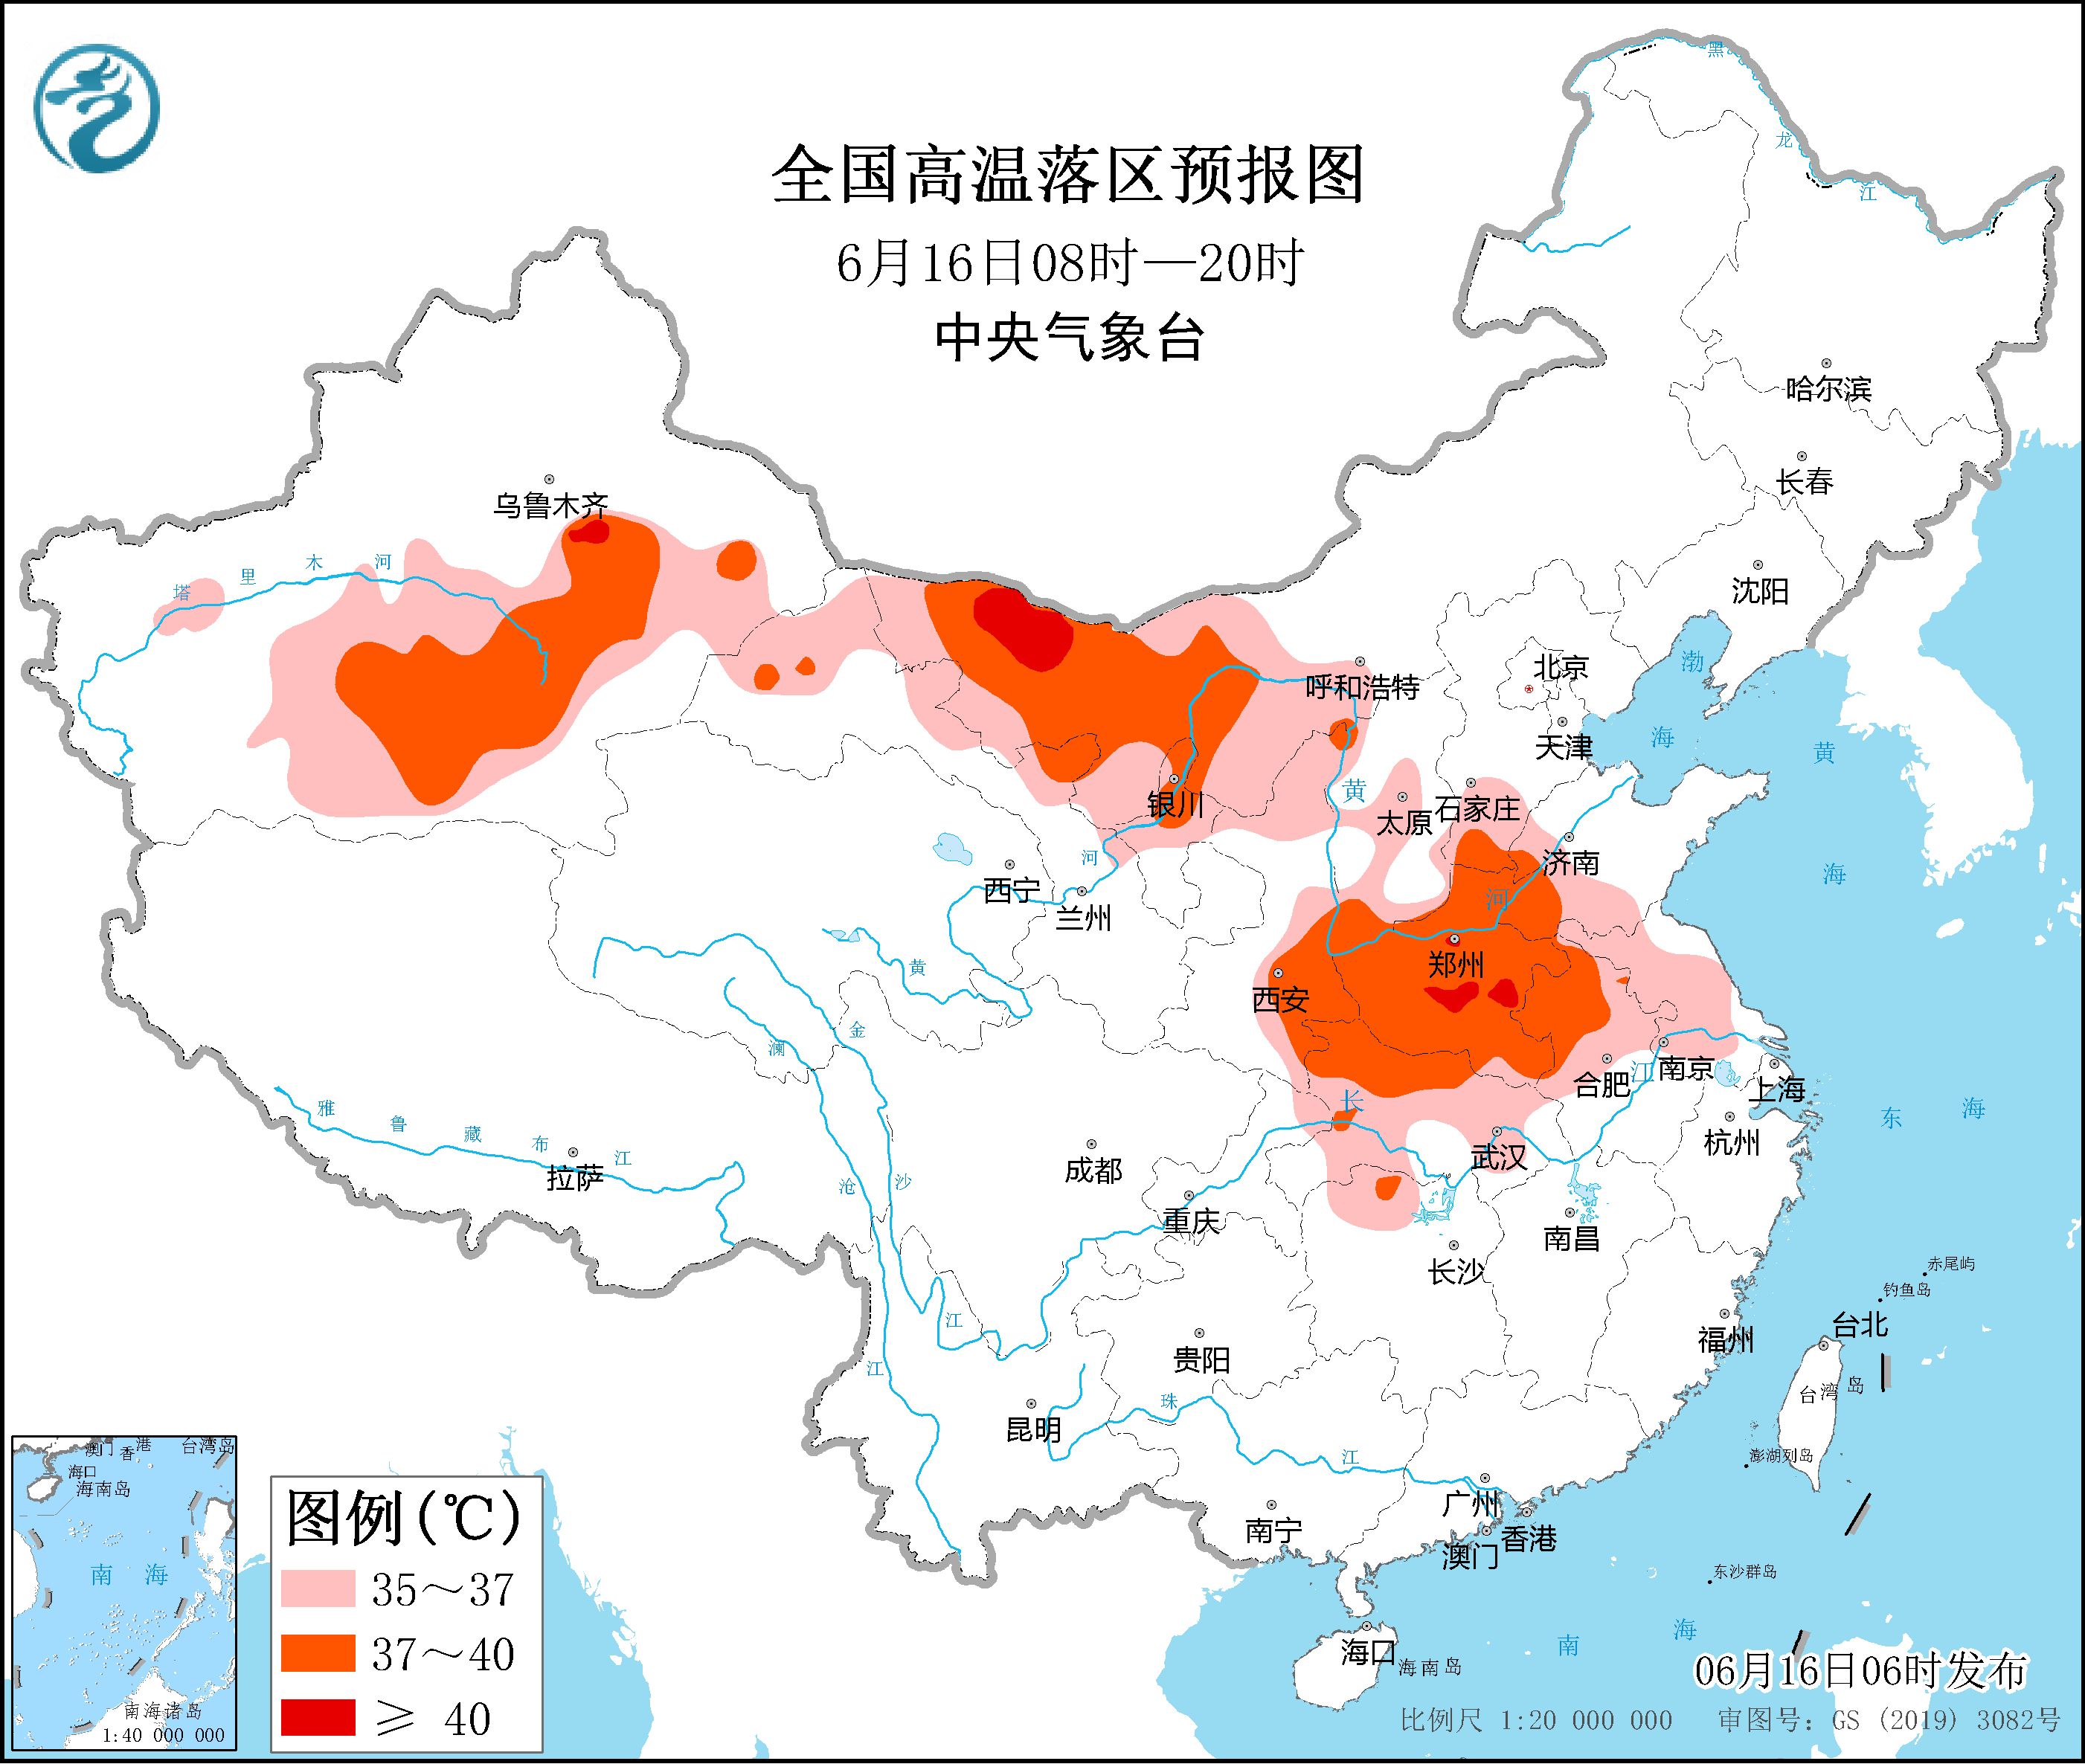 There is still heavy precipitation in South China, Jiangnan and other places, and persistent high temperature weather will occur in North China, Huanghuai and other places